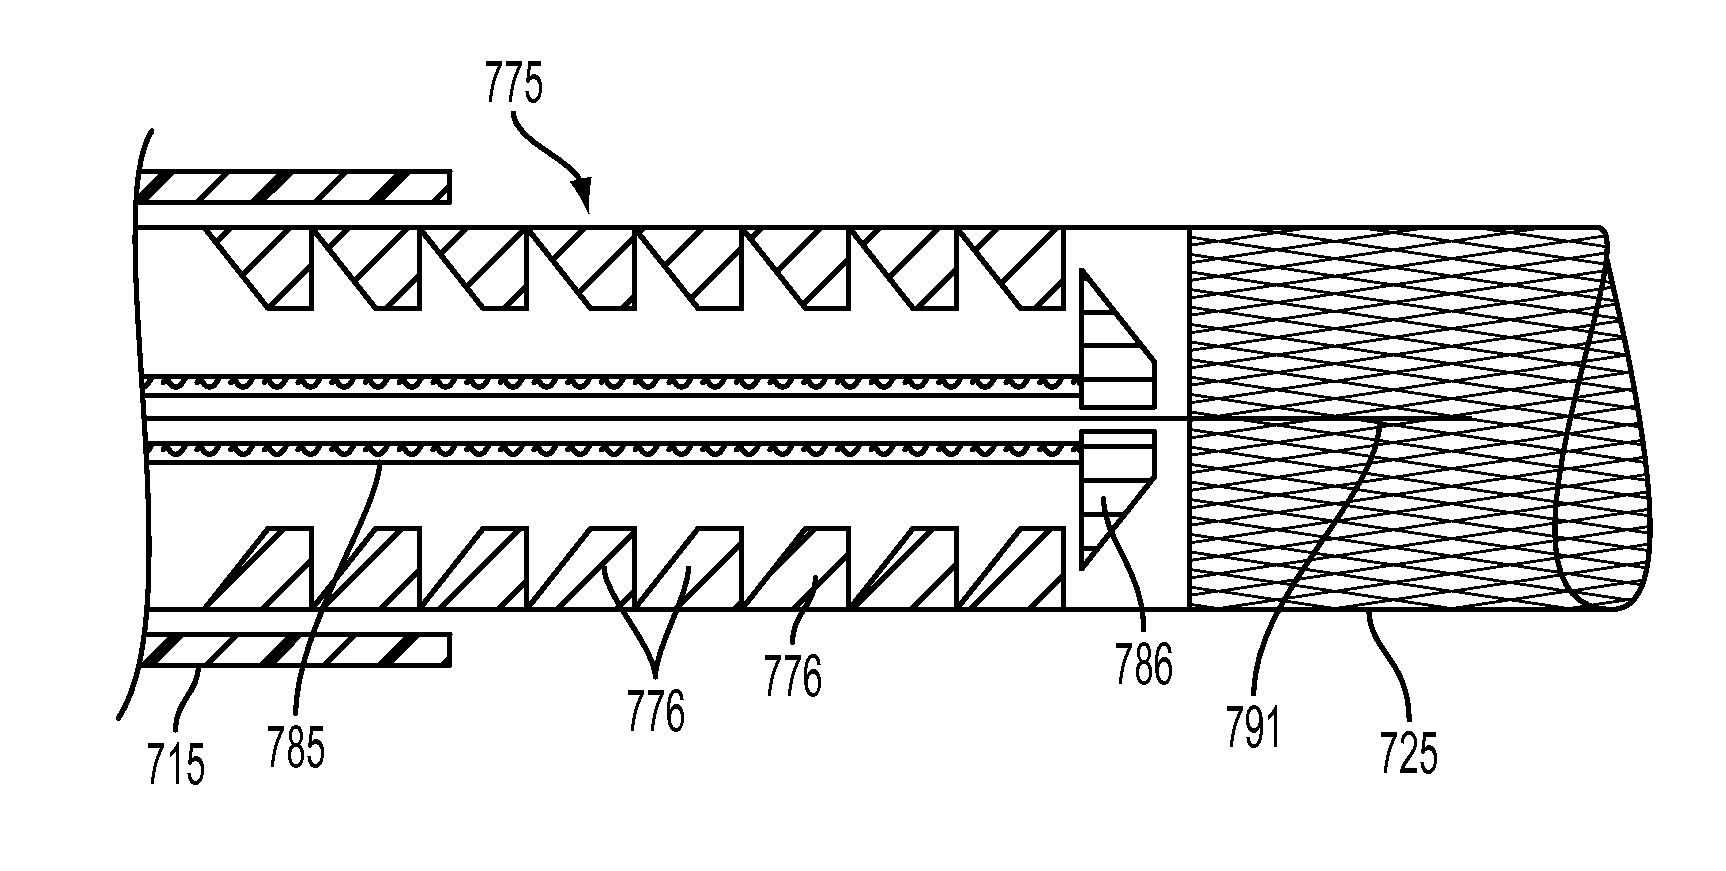 Stent Deployment Device and Methods for Use